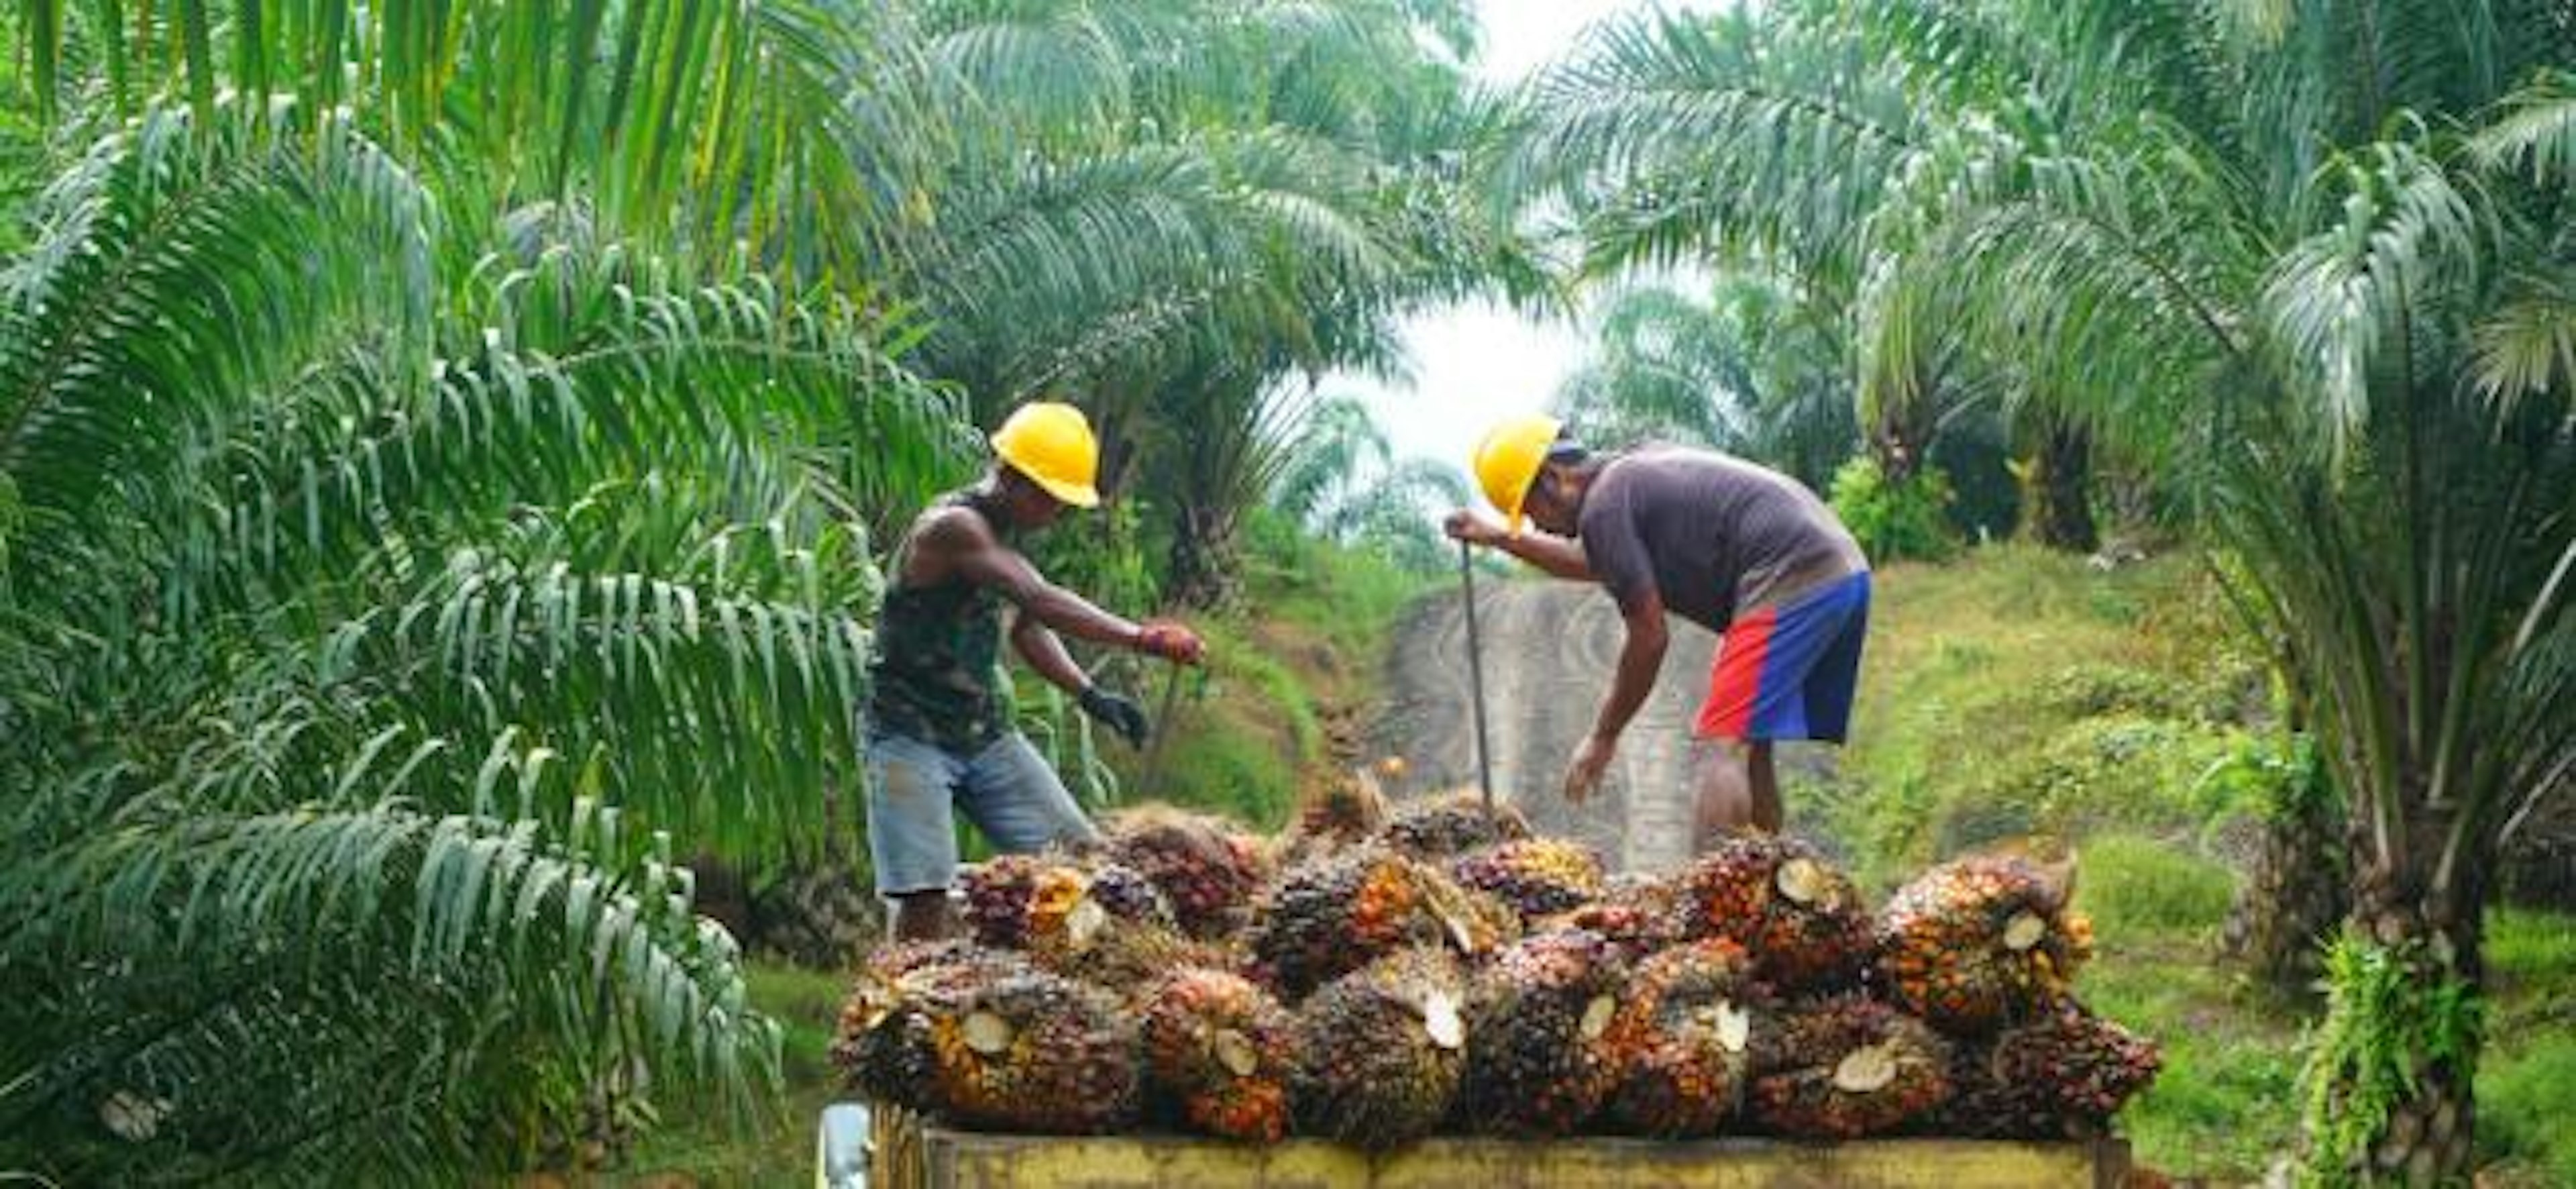 Workers harvesting palm fruit in Indonesia // First Resources, Shutterstock